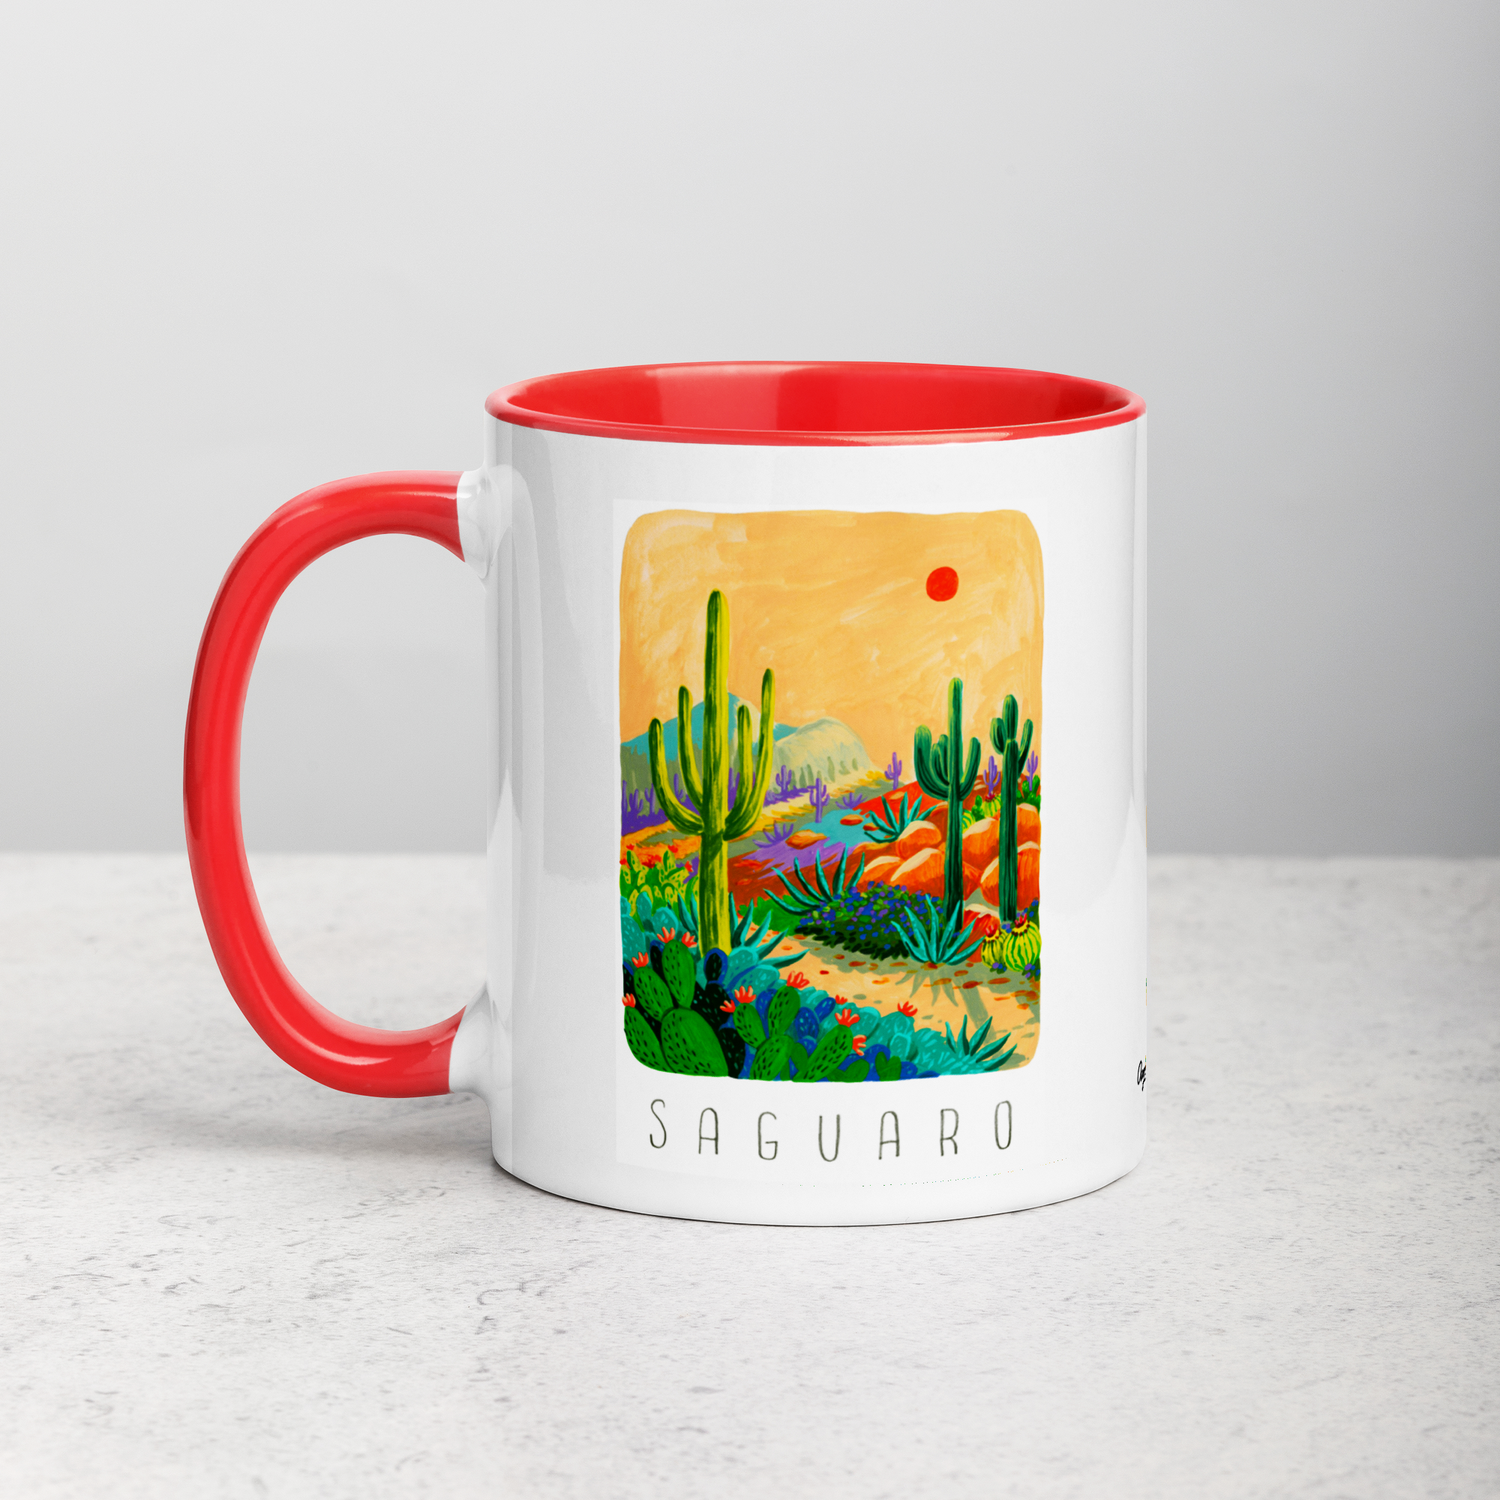 White ceramic coffee mug with red handle and inside; has Saguaro National Park illustration by Angela Staehling